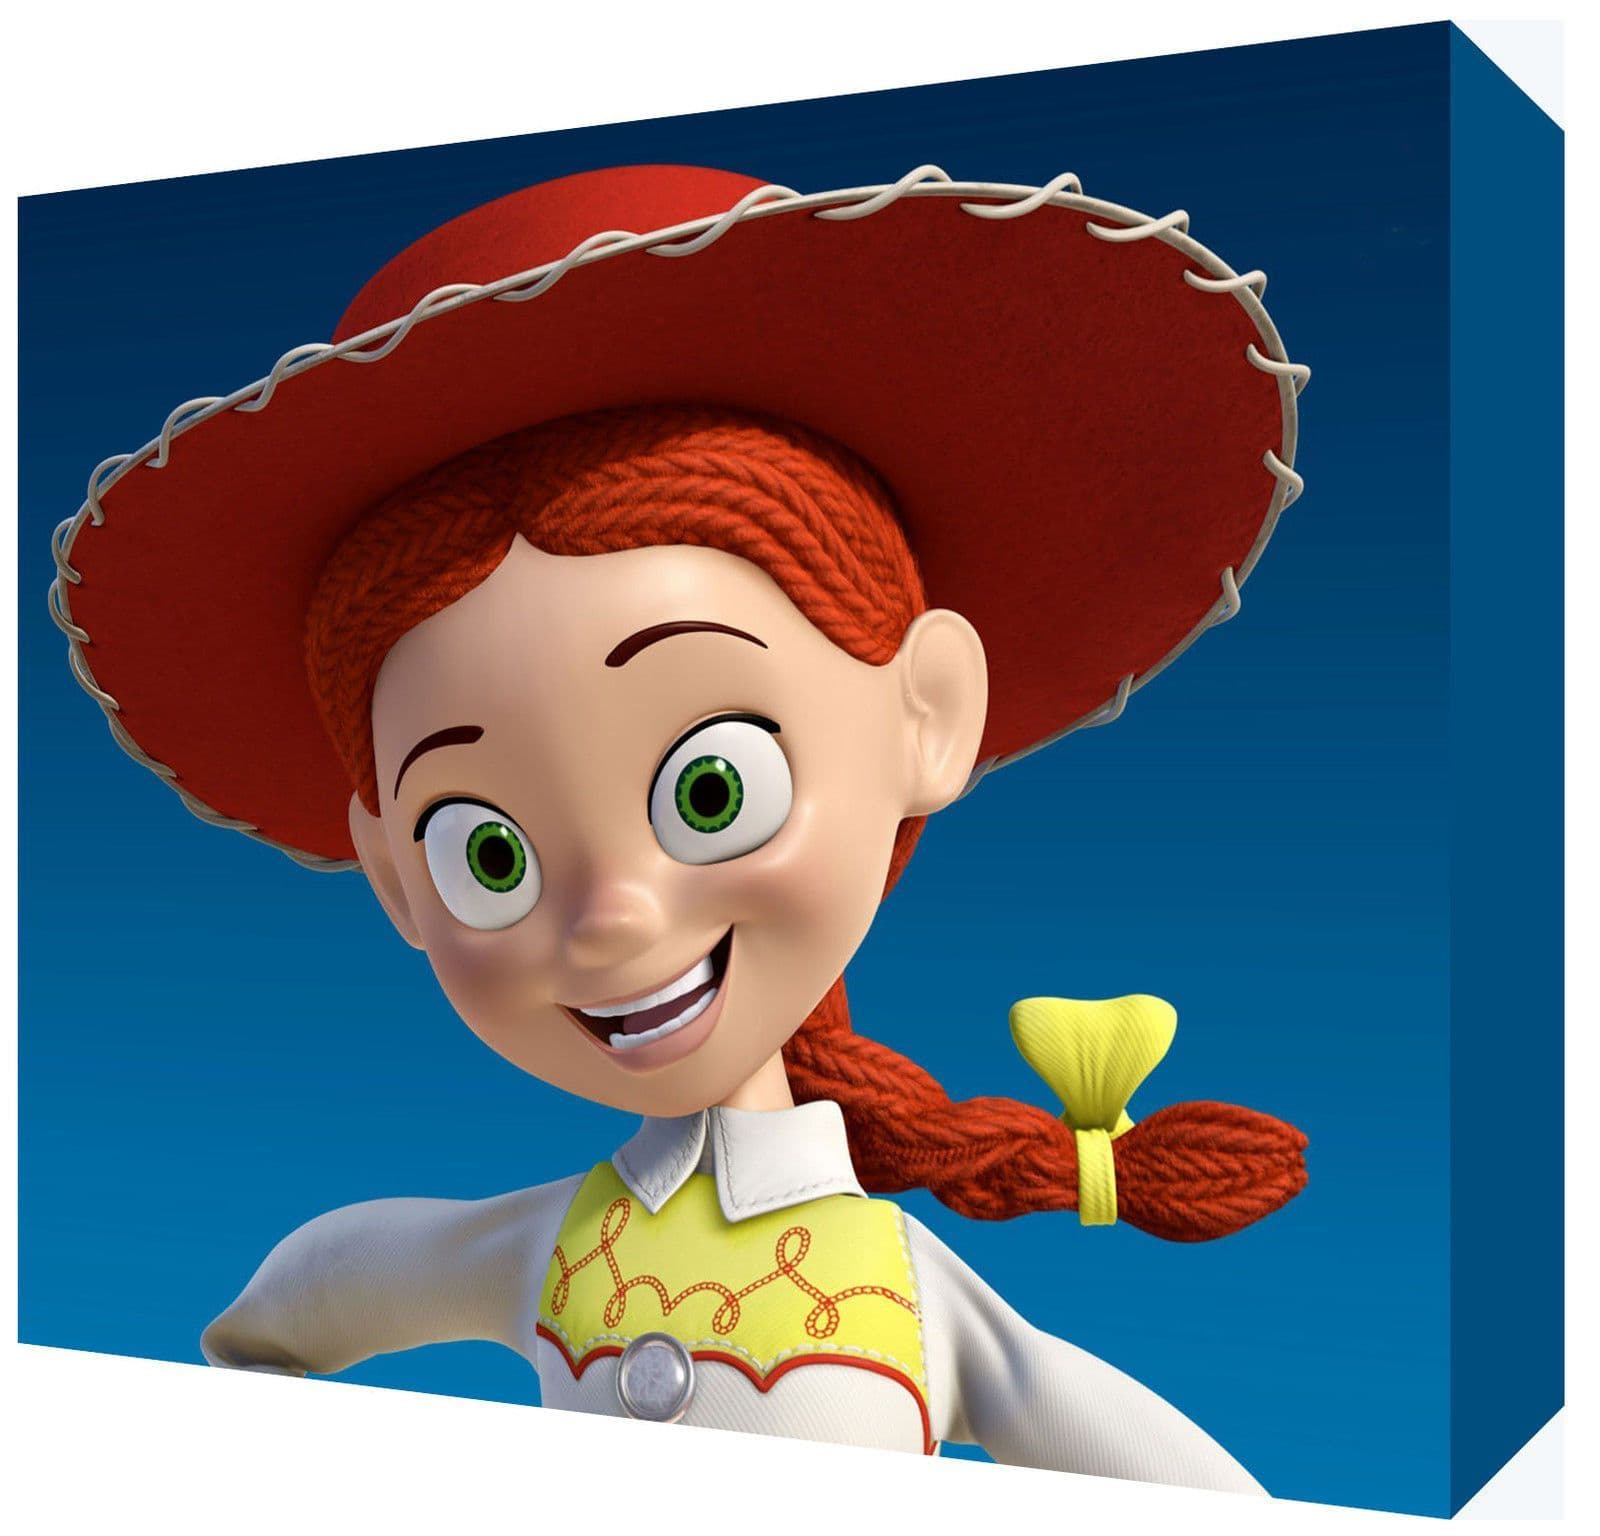 brent wilber recommends pics of jessie from toy story pic